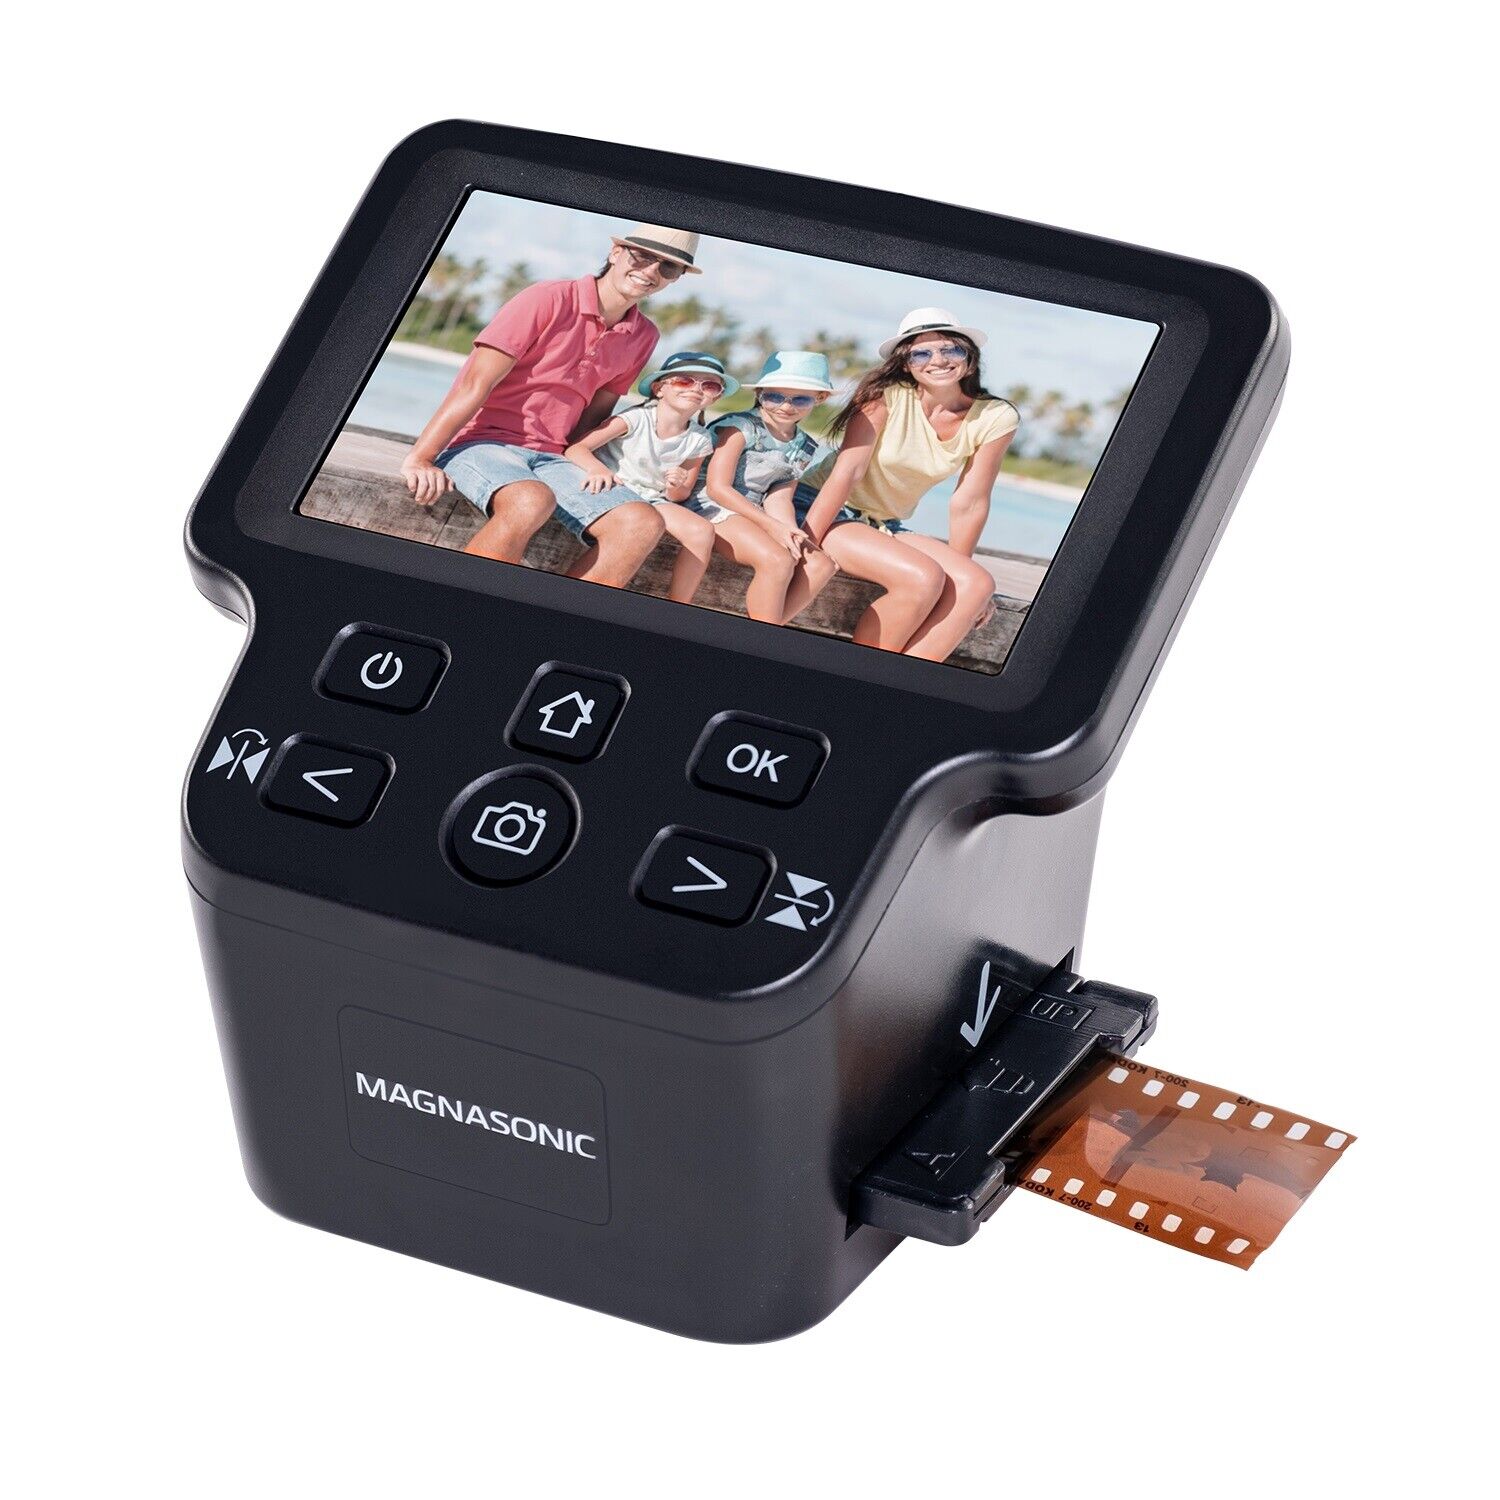 Magnasonic 24MP Film Scanner with 5'' Display Converts Film & Slides into JPEGS